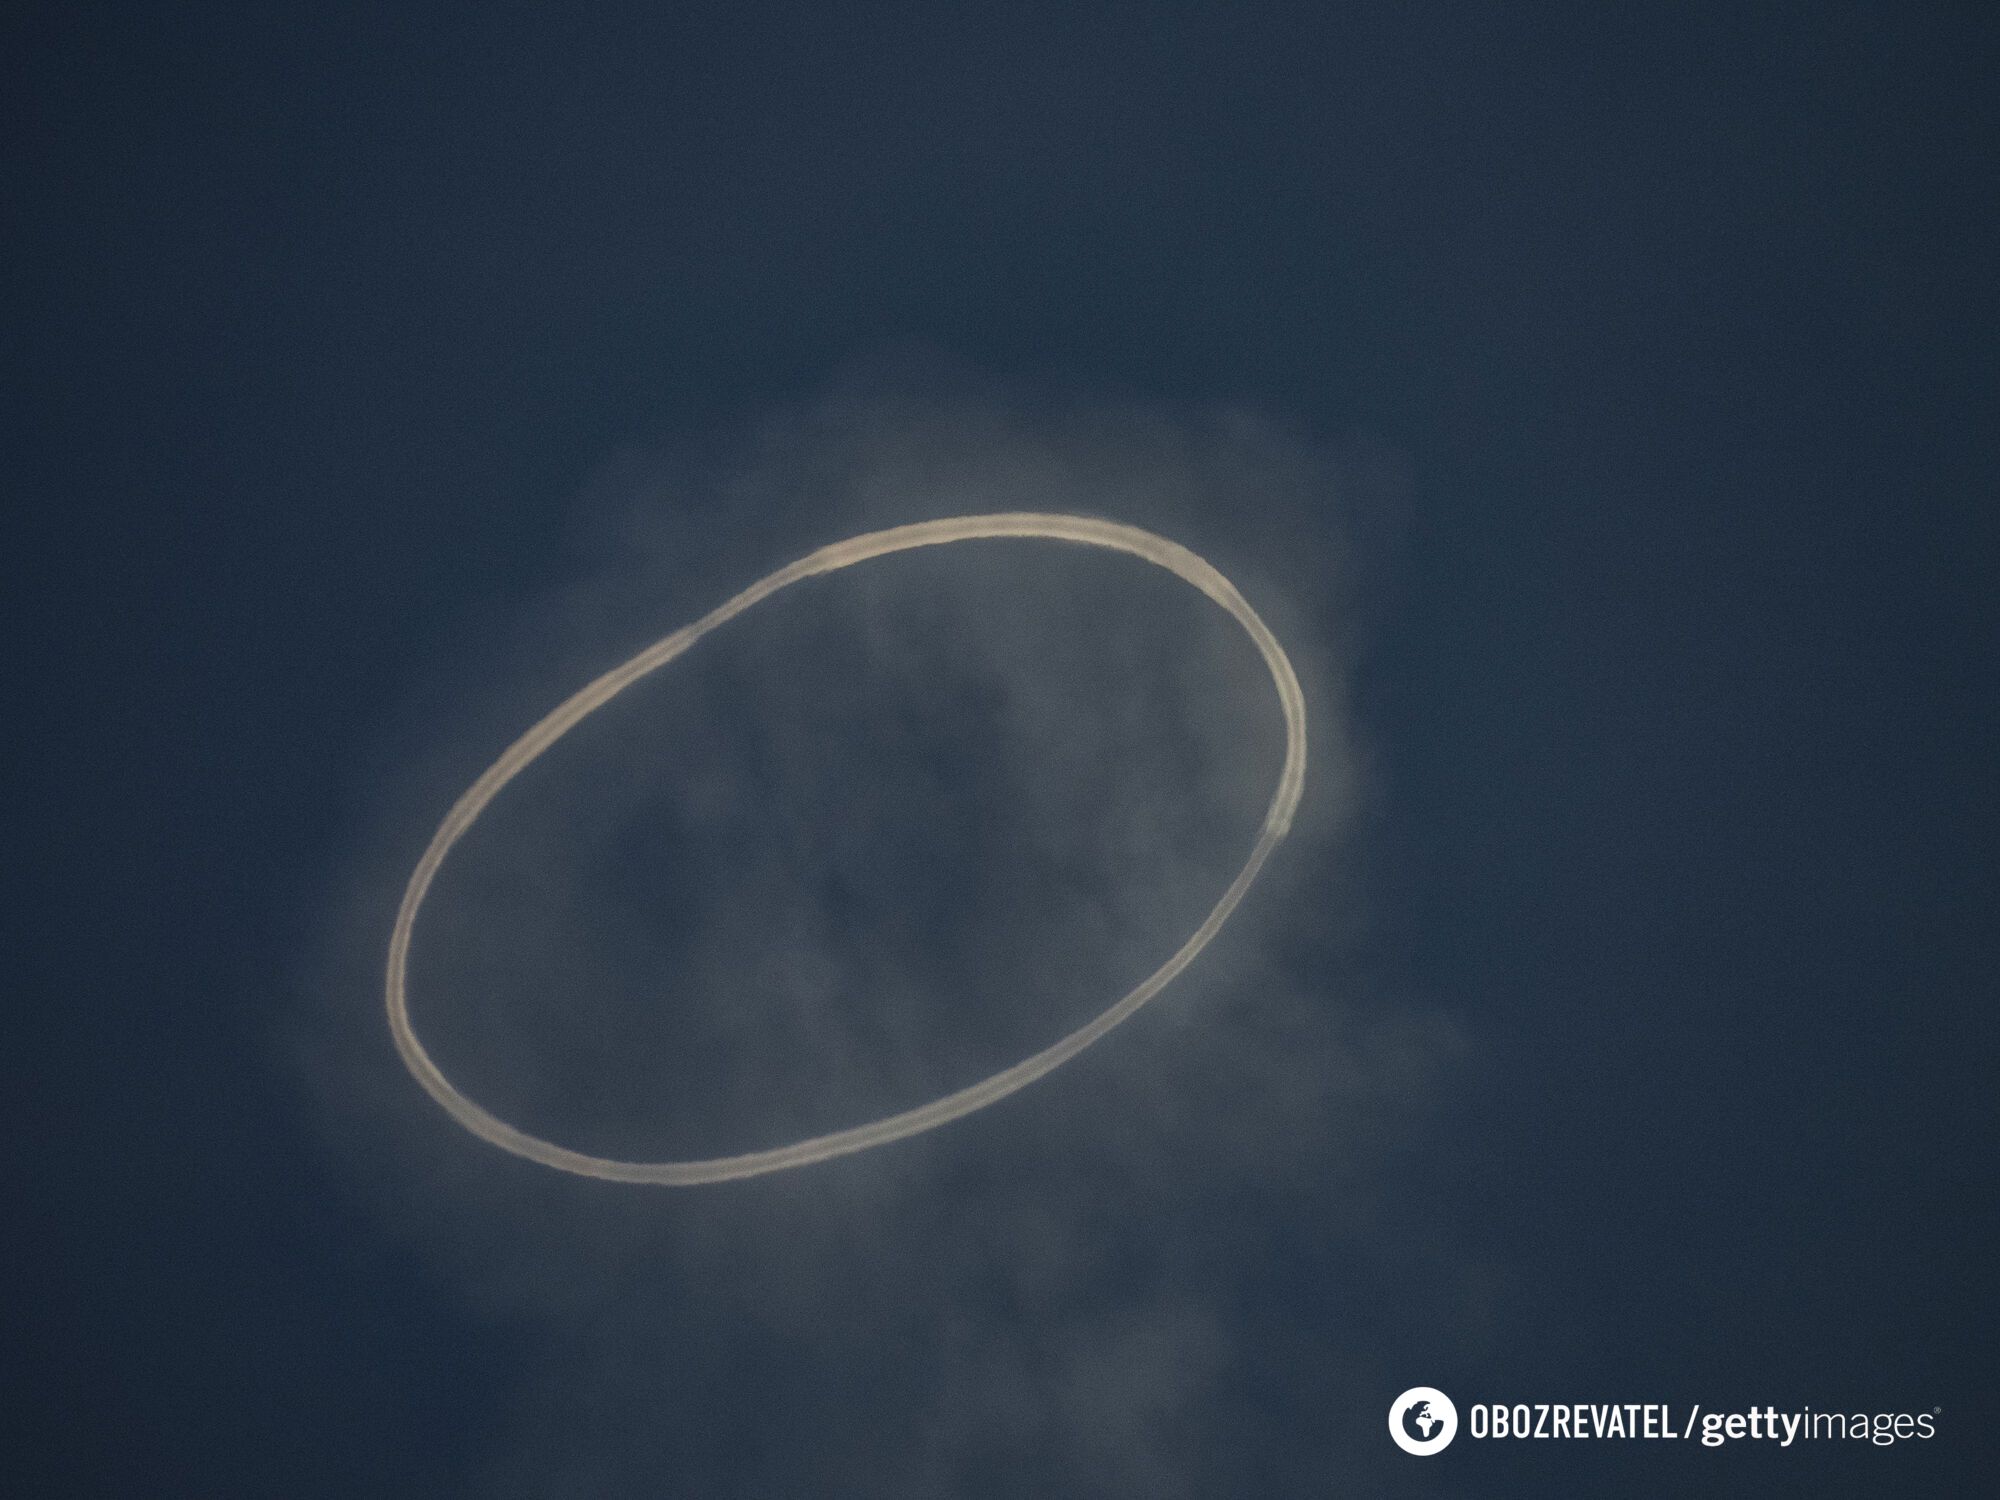 Thousands of smoke rings spotted above Mount Etna: what is it and is it safe for tourists